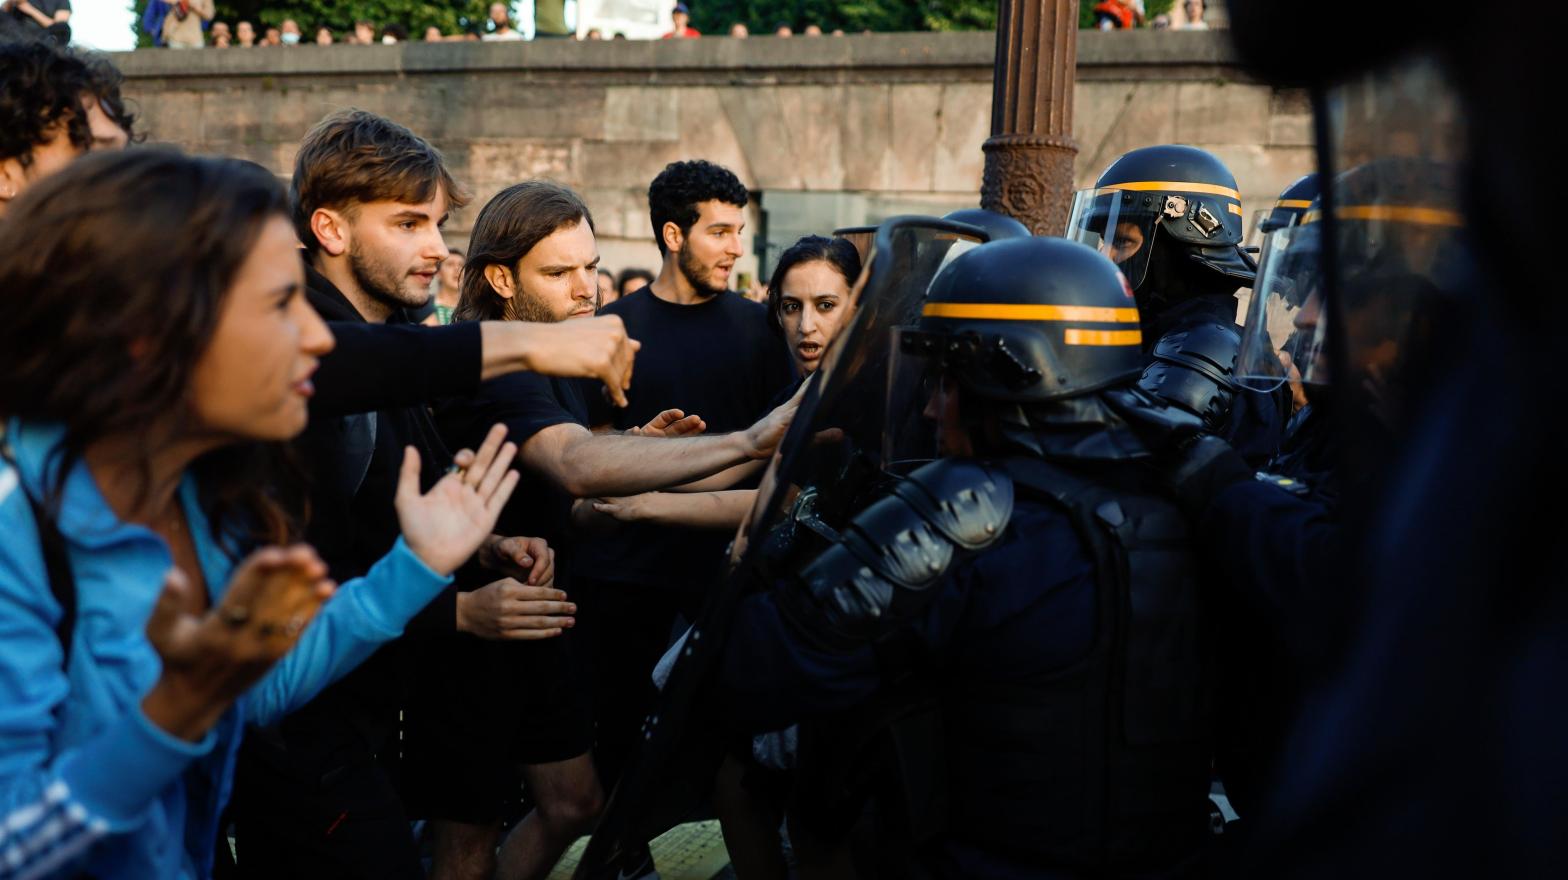 Protestors clash with police in Nanterre, France last week after the killing of Nahel Merzouk. (Image: Ameer Alhalbi, Getty Images)